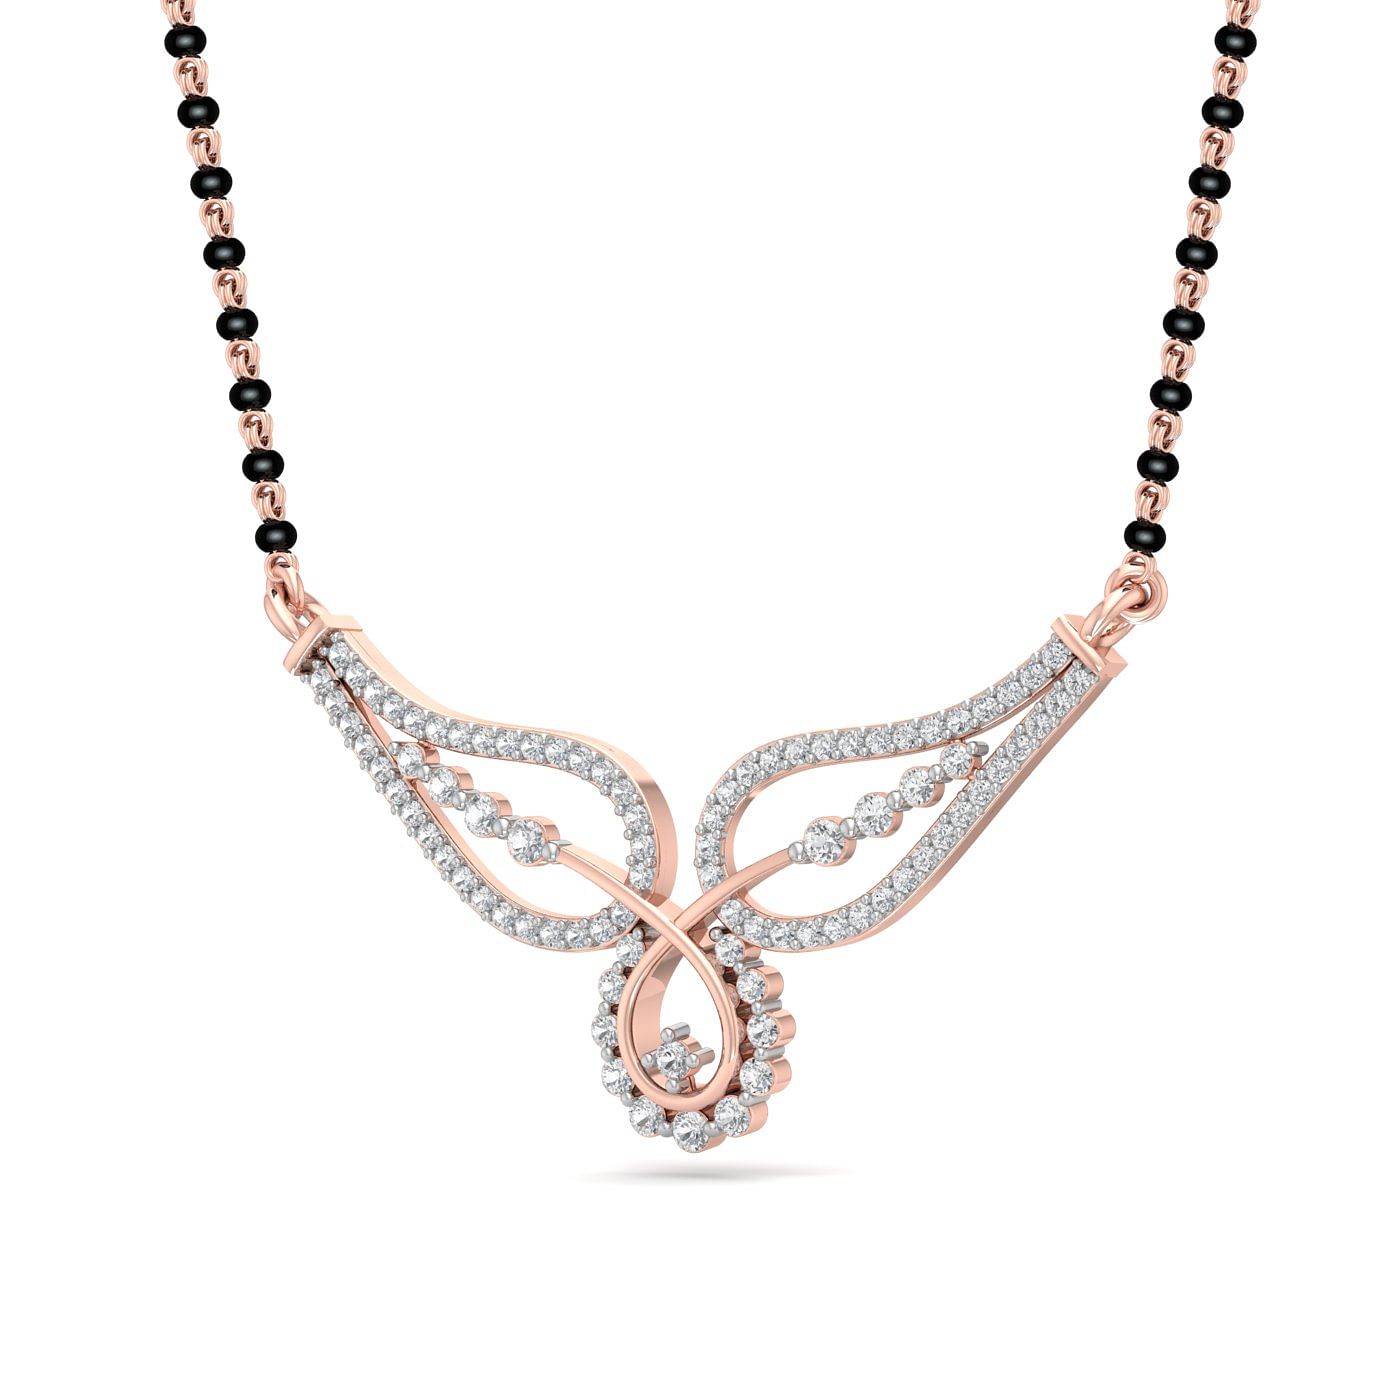 bride ties mangalsutra with diamond rose gold